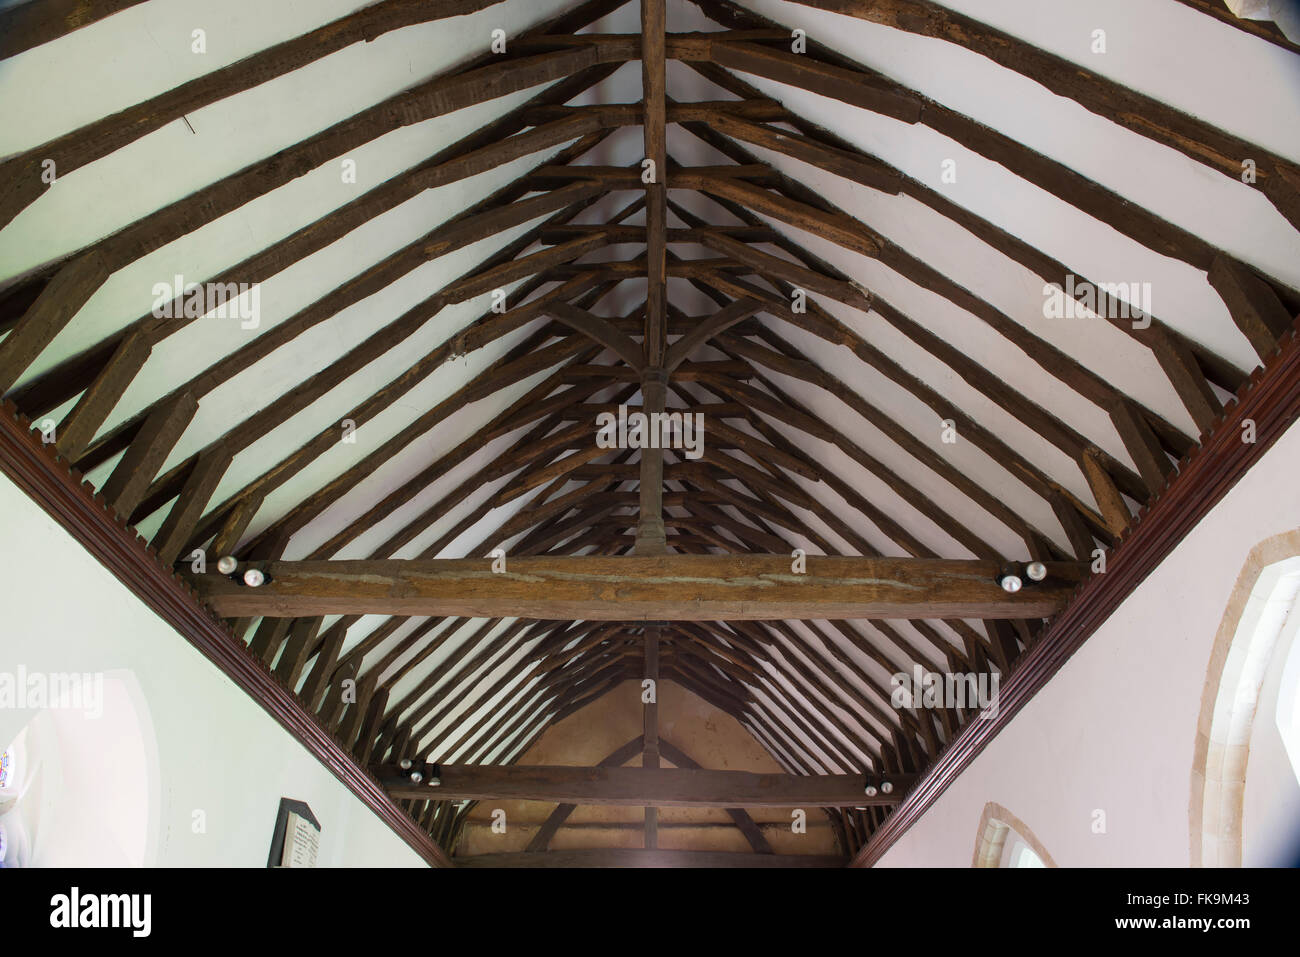 The roof beams of the nave in the Norman church of St Nicholas, Iford, East Sussex Stock Photo